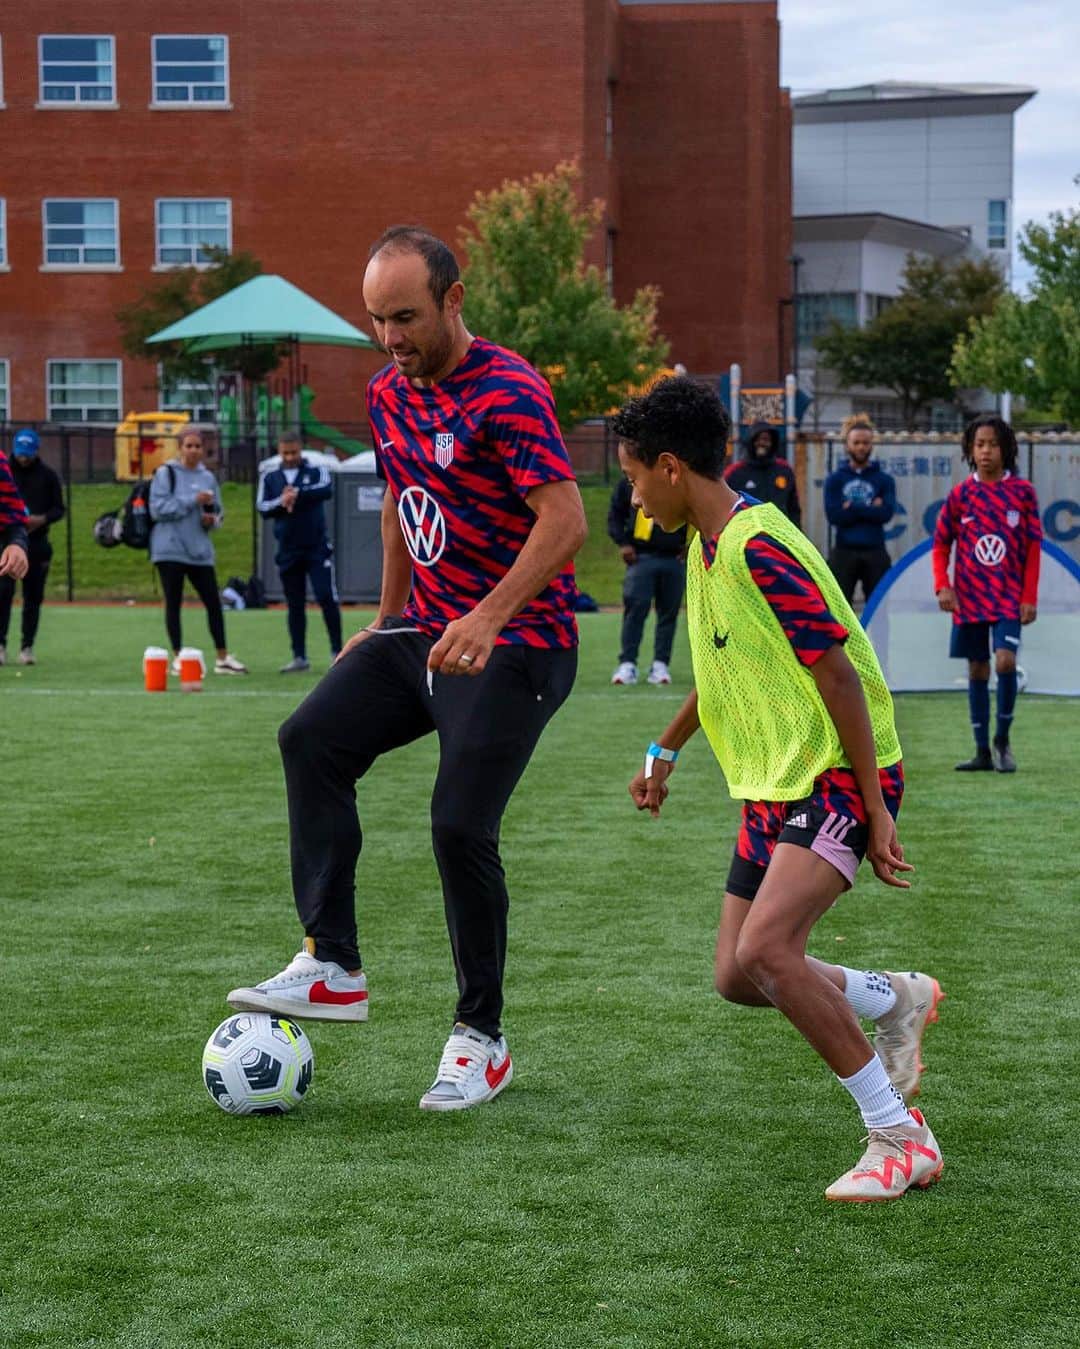 Volkswagen USAのインスタグラム：「Big futures come in small packages. We’re all about investing in what’s next, both on and off the field.   In Hartford, it was @usmnt legend @landondonovan10 inspiring the next generation of players at the U.S. Soccer x Nike Youth Soccer Clinic in collaboration with Volkswagen. Thanks to our partners @ussoccer and our friends at @nikefootball for helping us put our best foot forward in chasing a brighter future for the game.   #VW #VWGrowingTheGame #VWID4 #USSF #USMNT #Nike #NikeFC」